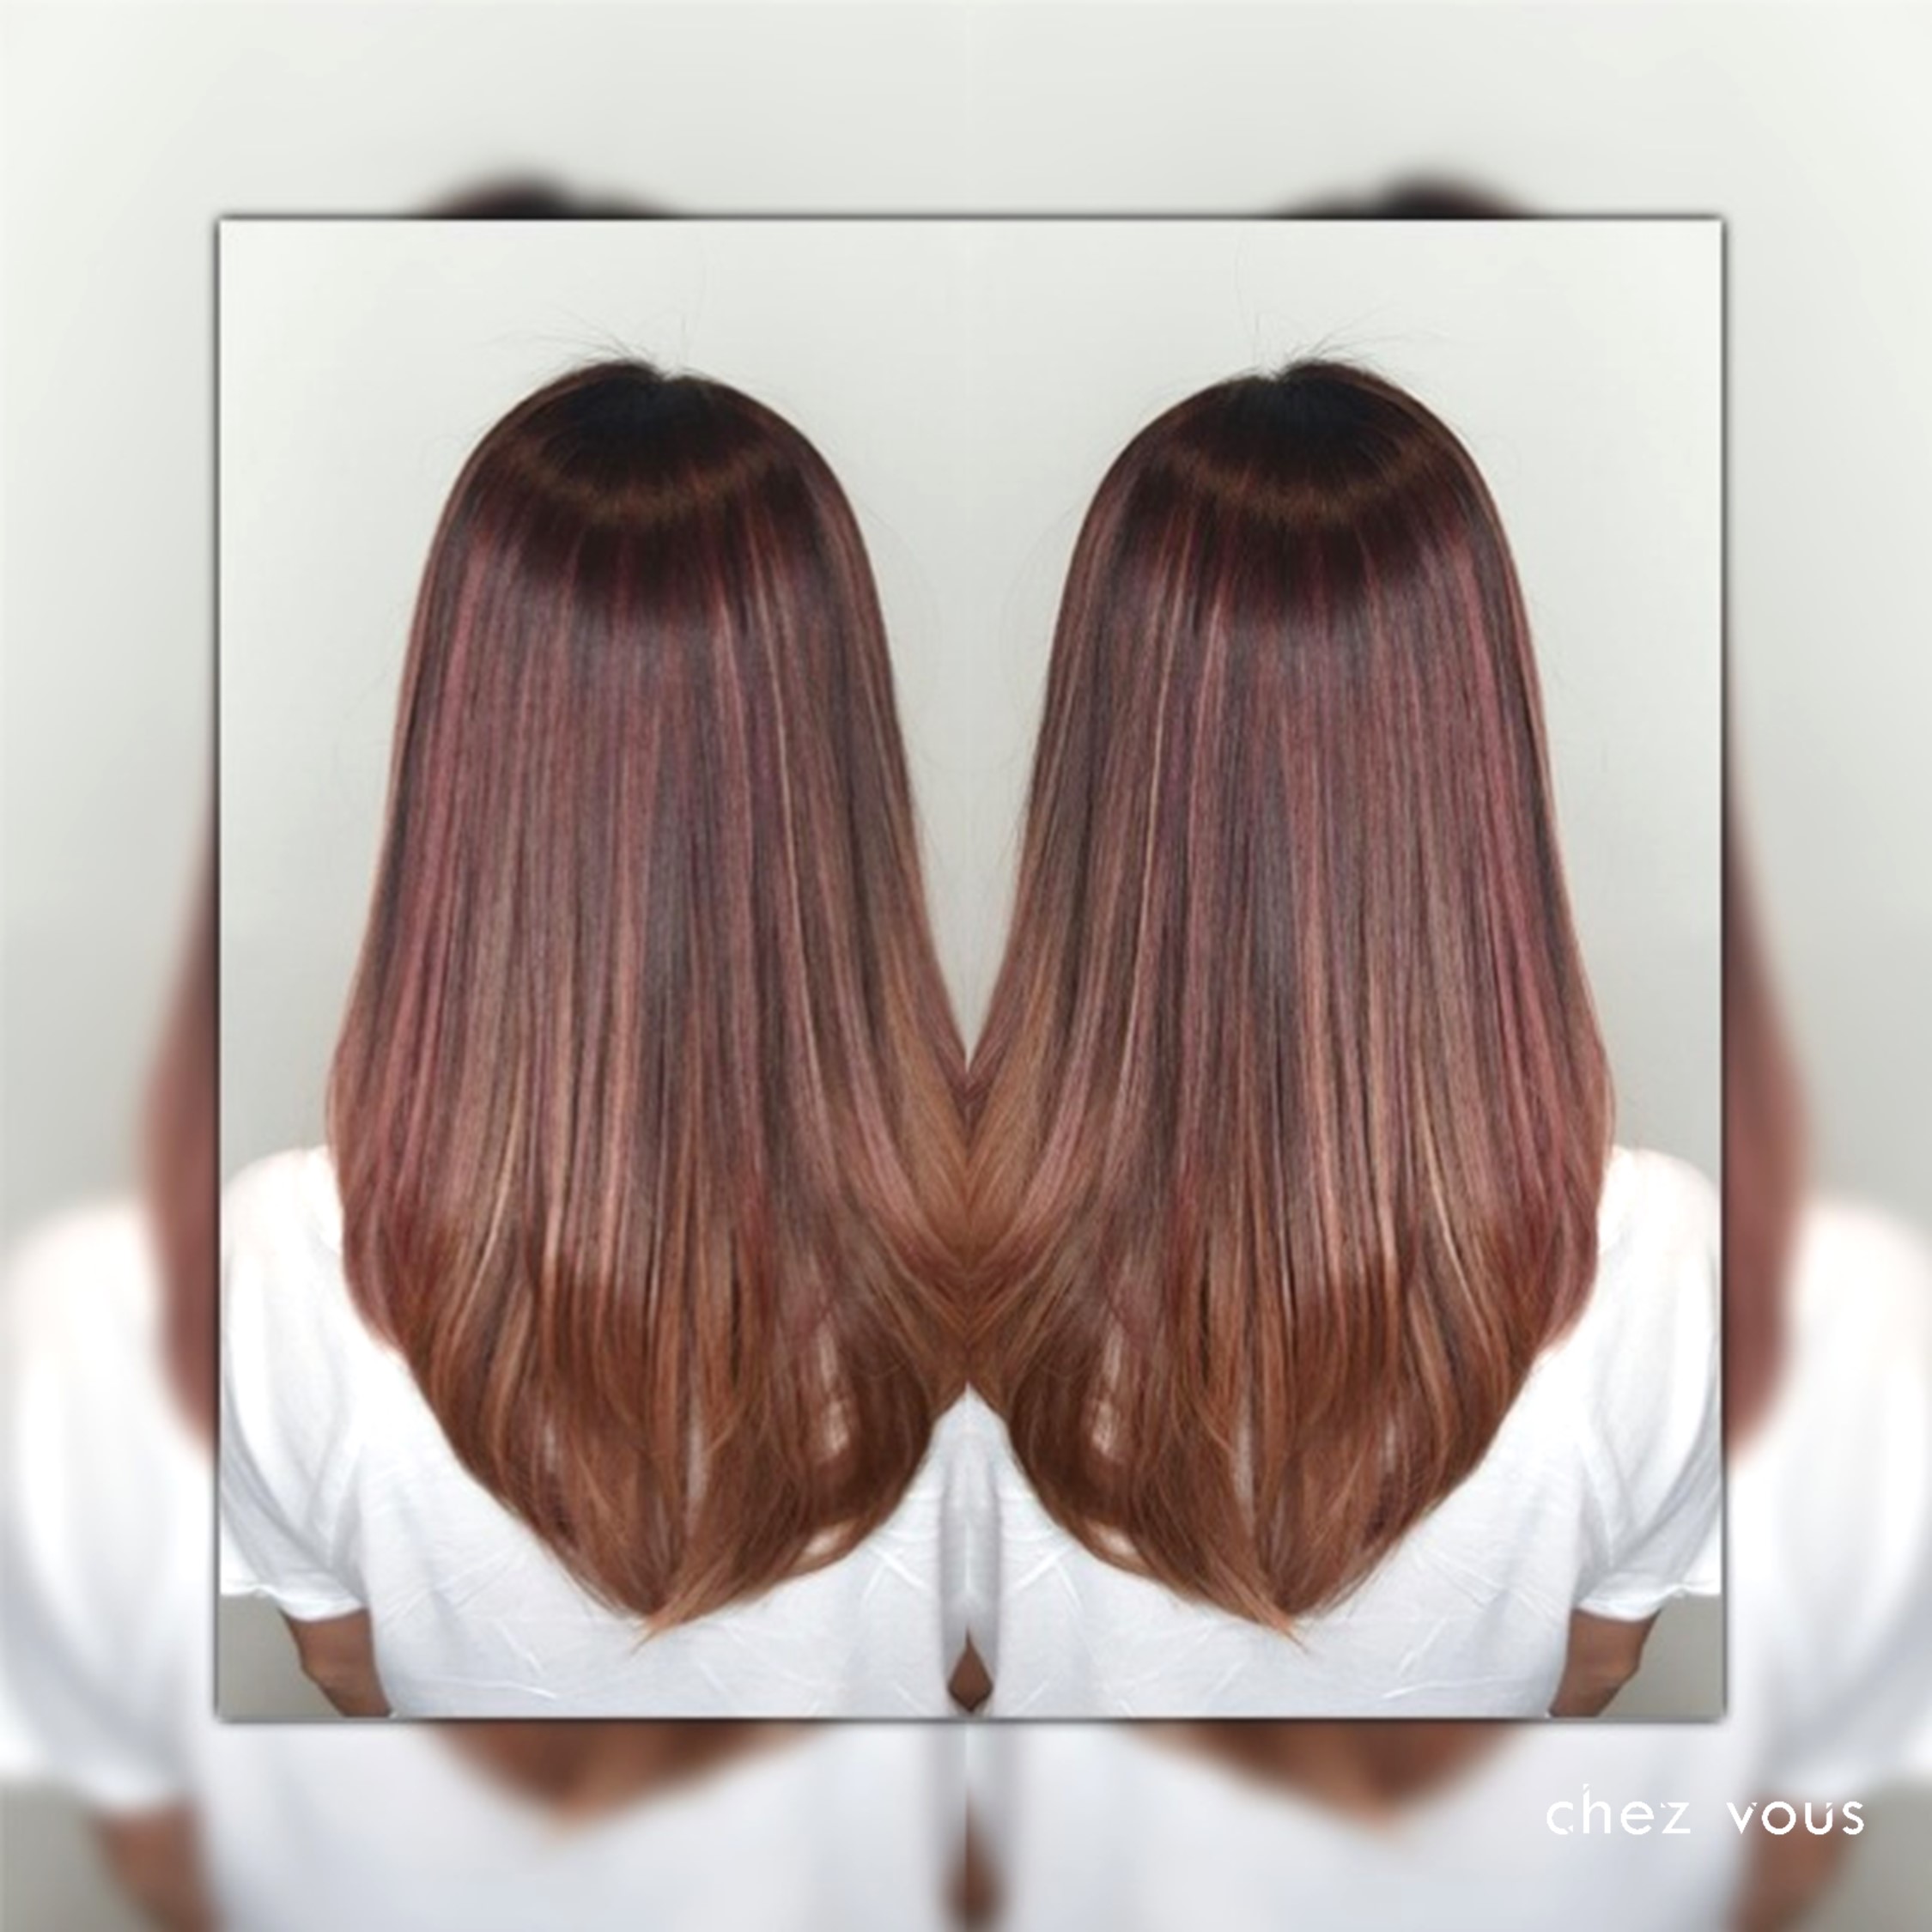 Done by Associate Salon Director of Chez Vous: Readen Chia | Design: Melted Strawberry Colour Balayage Version II with a Tinge of Rose Gold Babylights